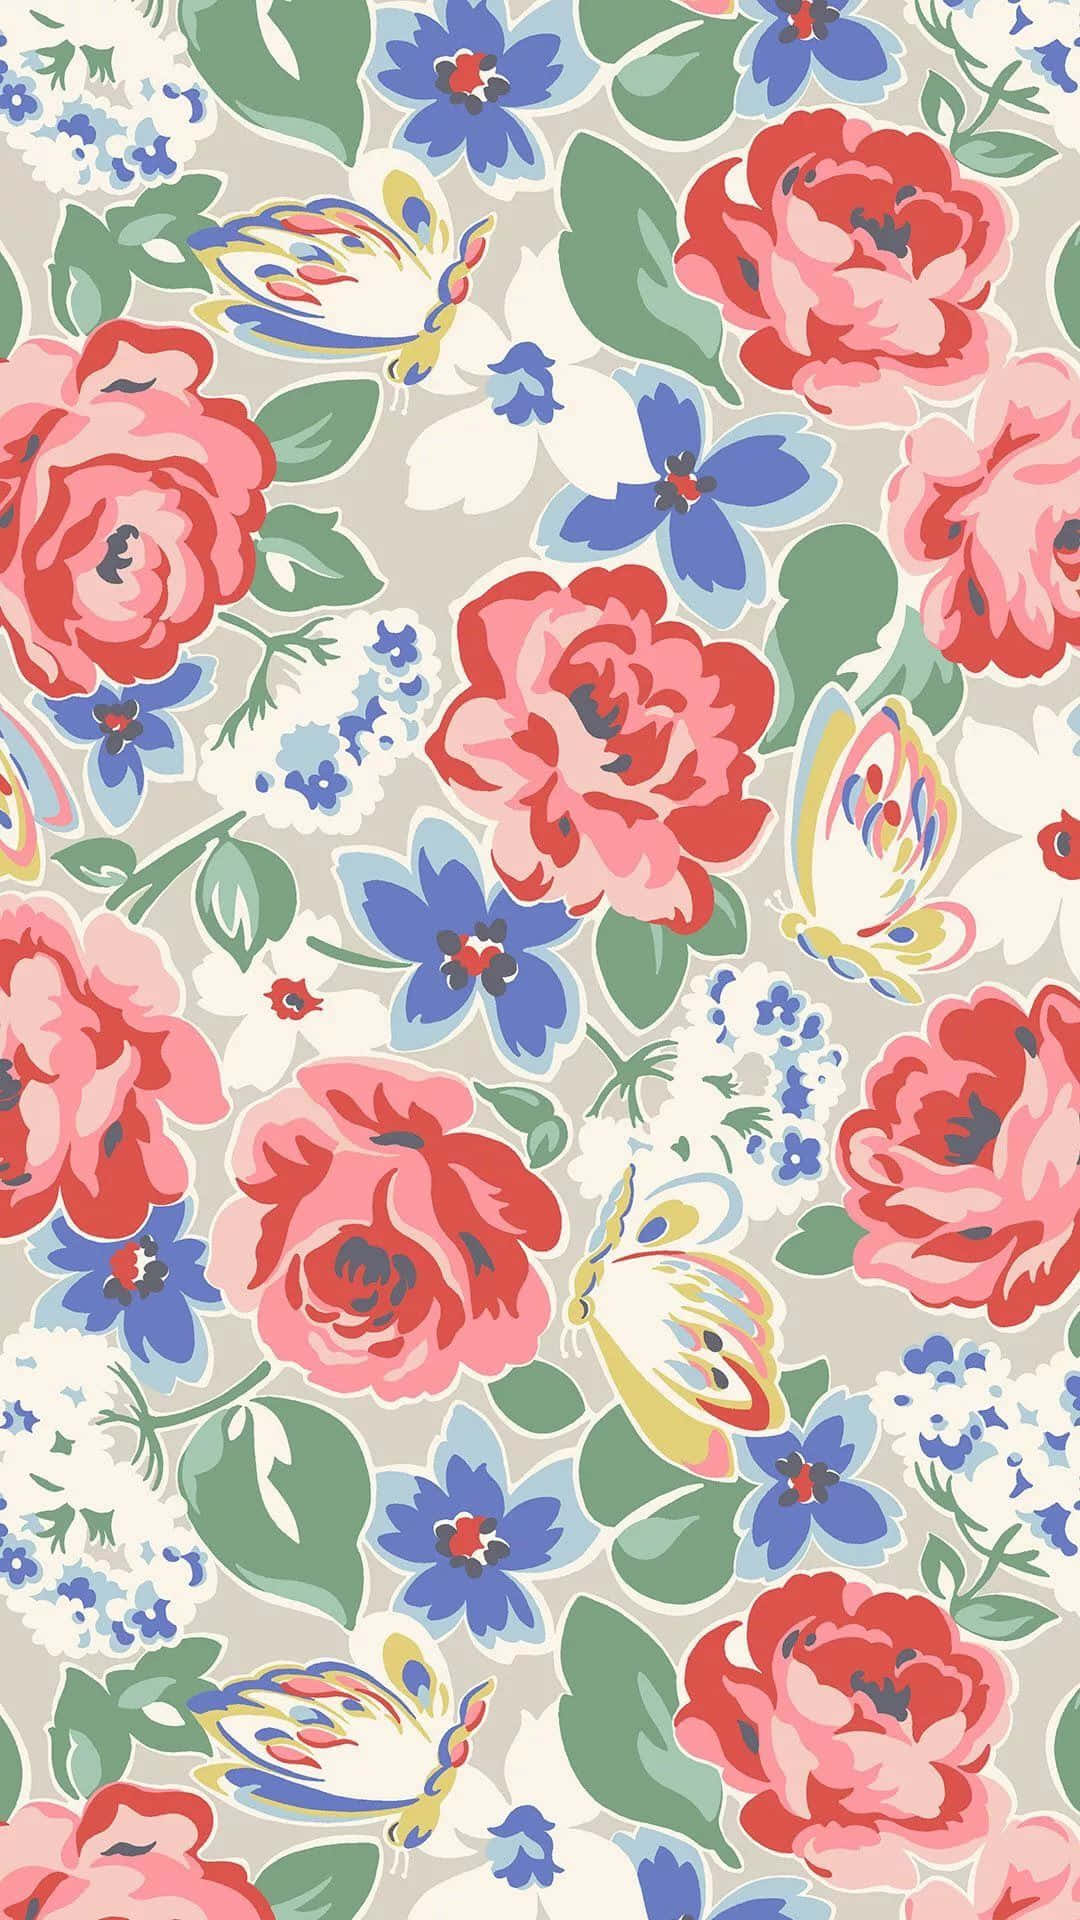 Lillypulitzer Iphone Roses Becomes Lilly Pulitzer Iphone Rosor In Swedish. Wallpaper